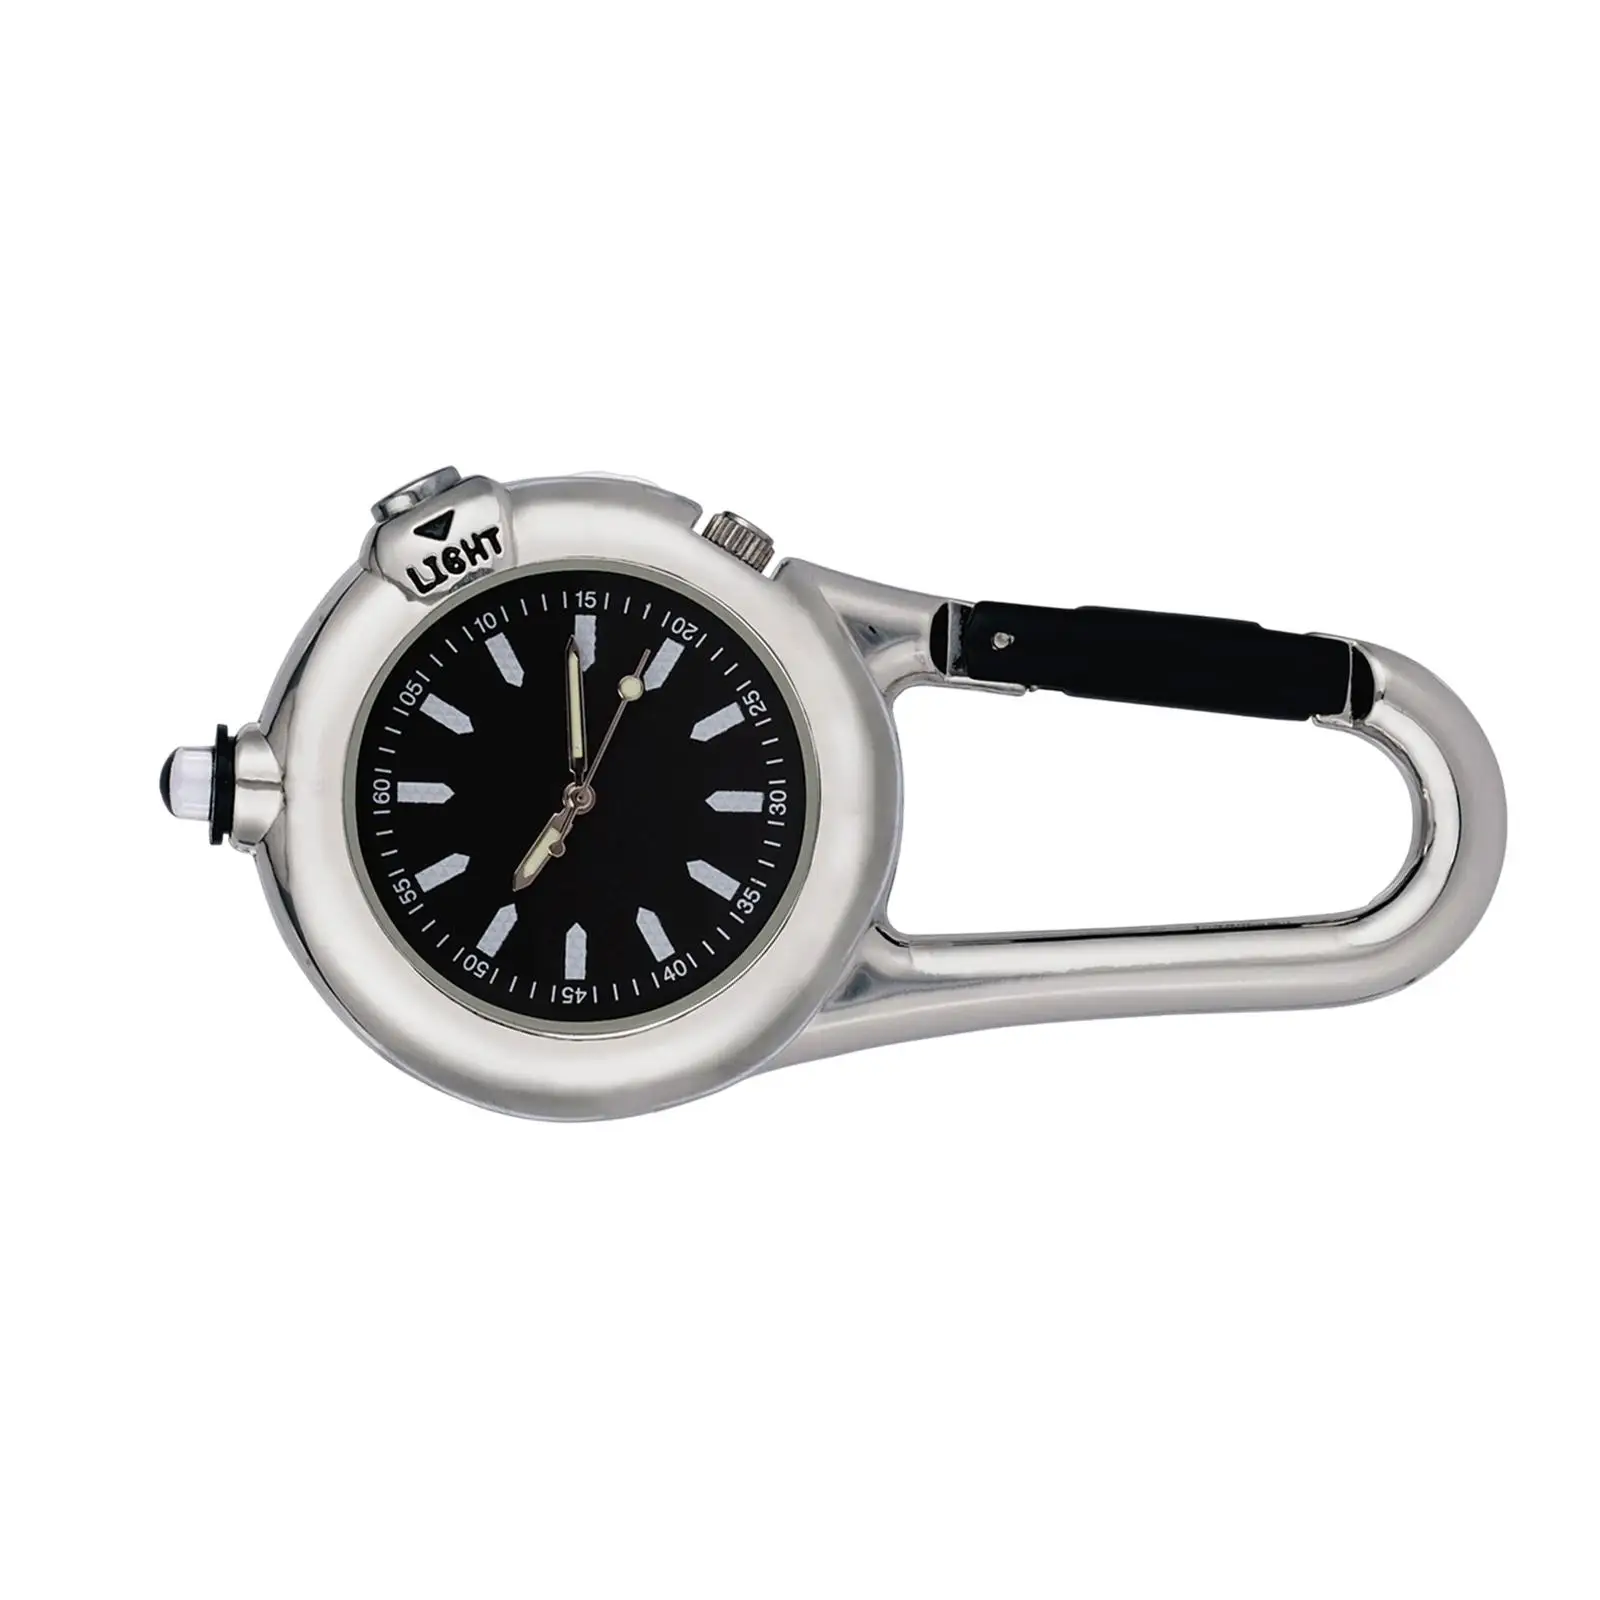 Mini Clip On Carabiner Pocket Watch Backpack Watch Unisex Luminous with Light Climbing Watch for Outdoor Camping Gear